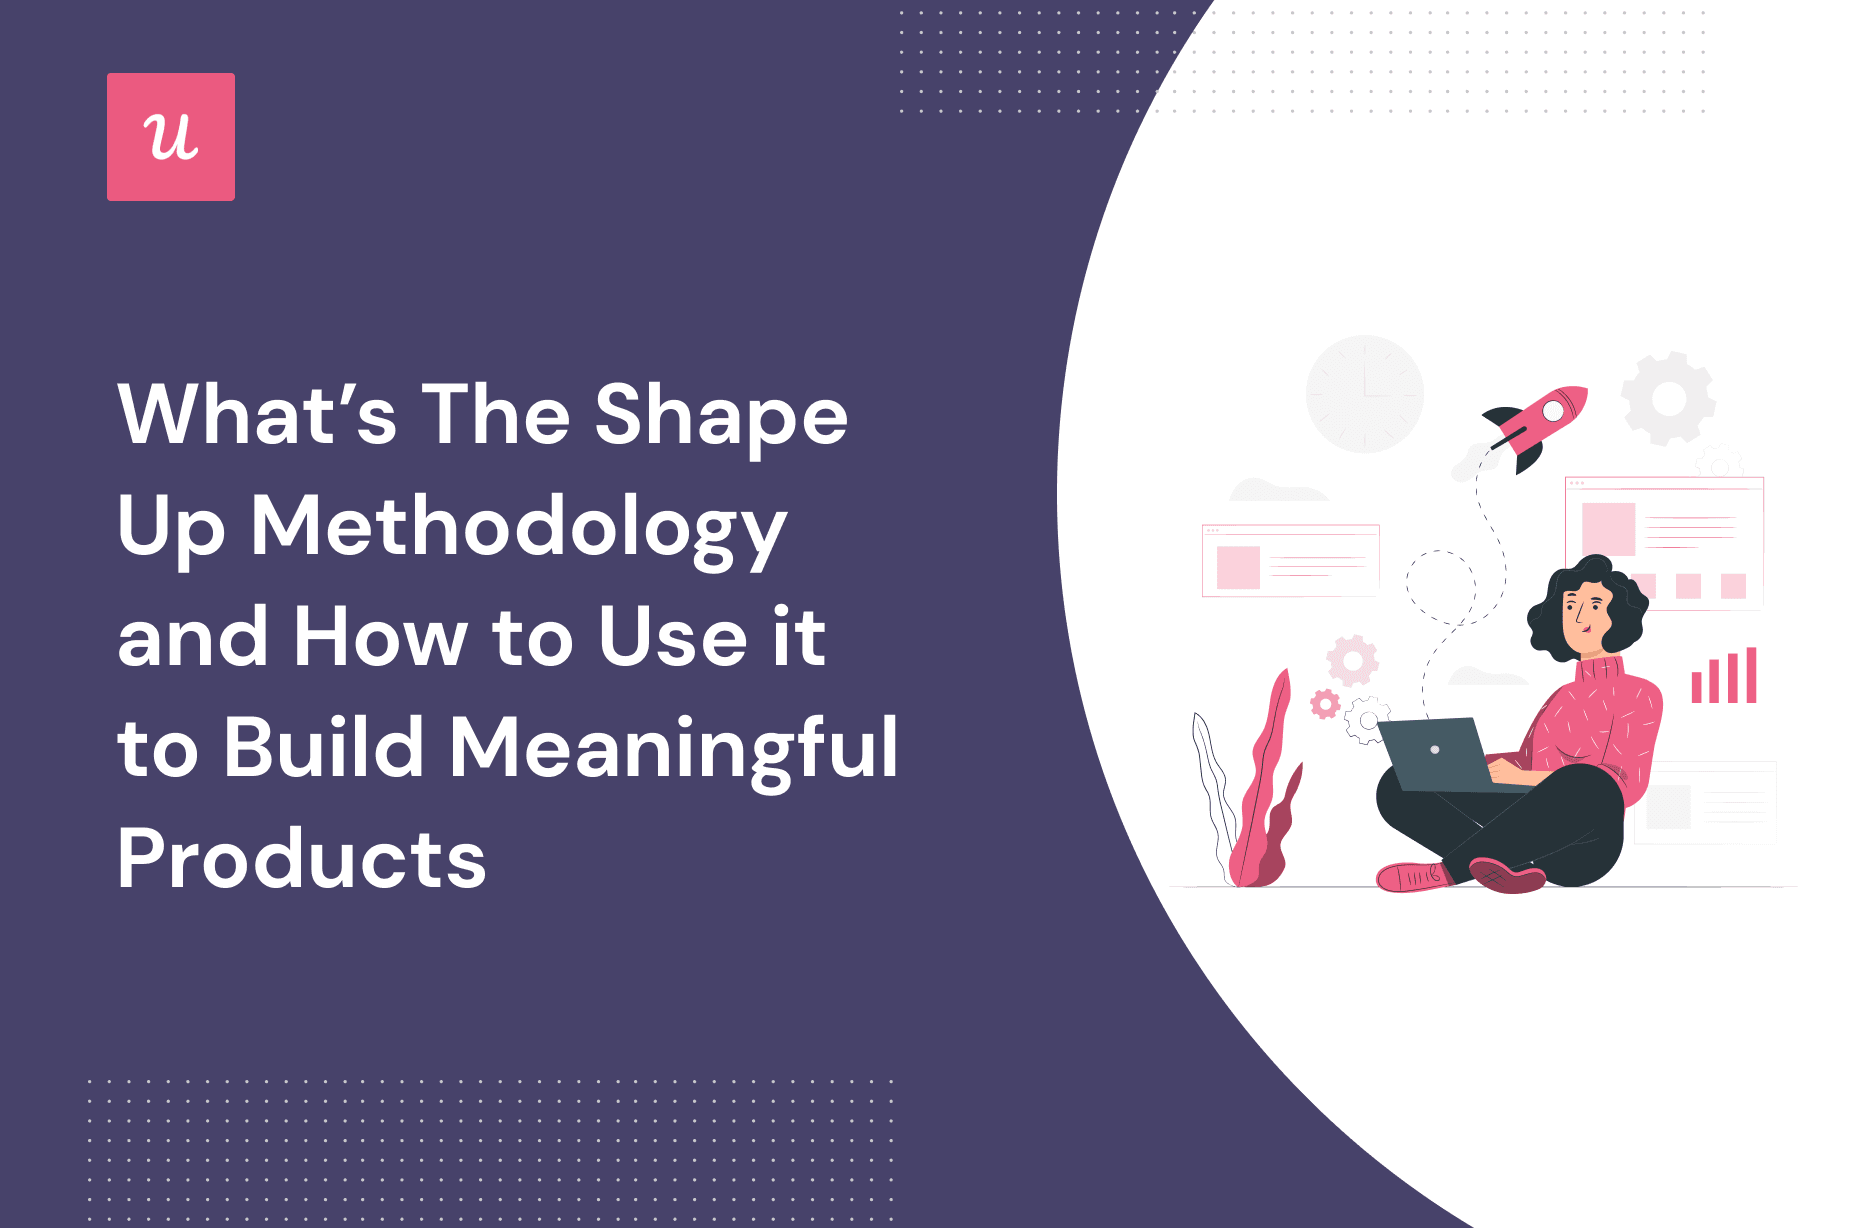 What’s the Shape Up Methodology and How to Use it To Build Meaningful Products cover